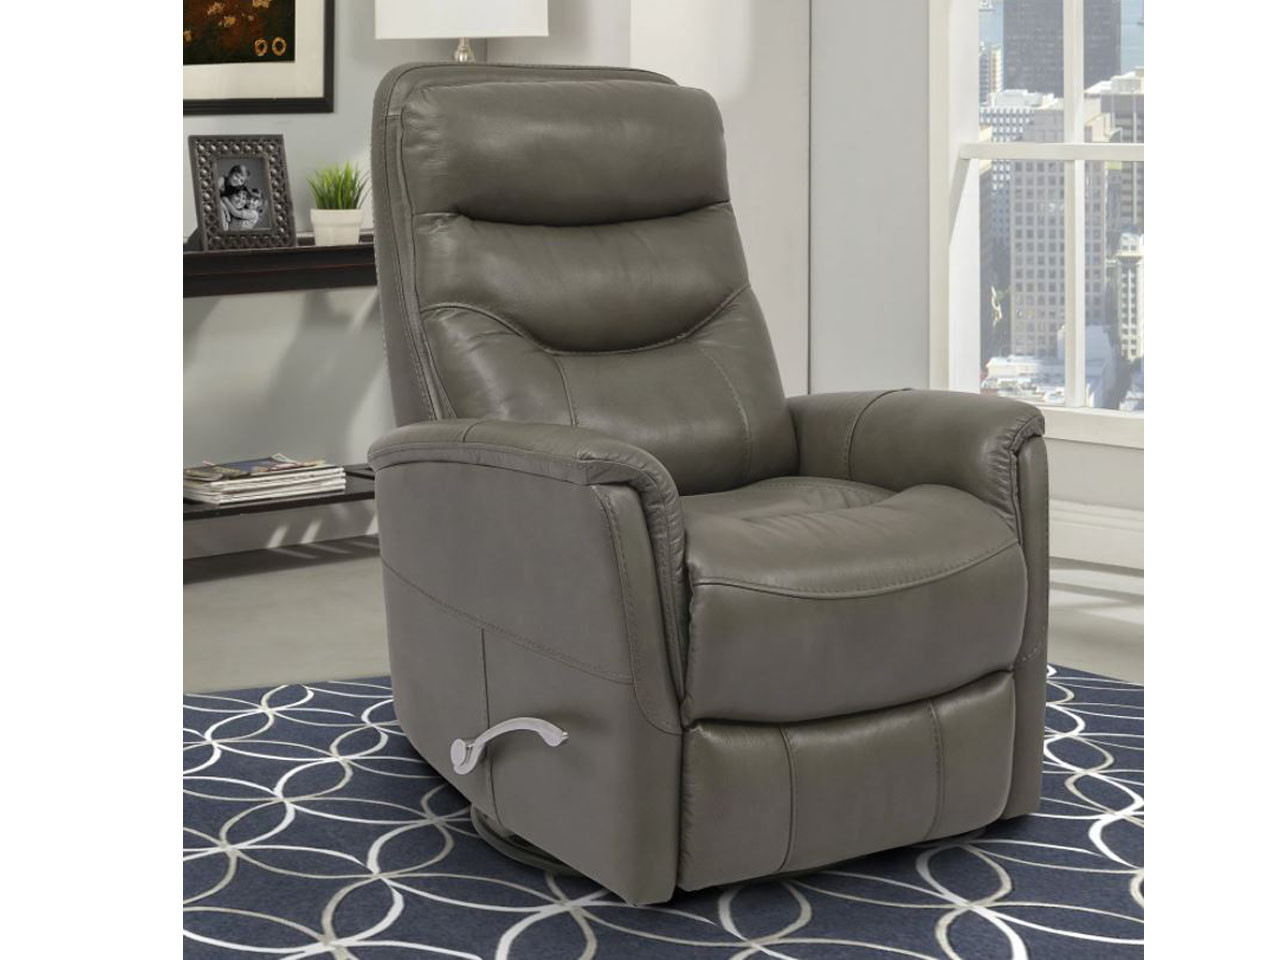 Solana Triple Power Reclining Recliner- Moon Mist or Space Gray